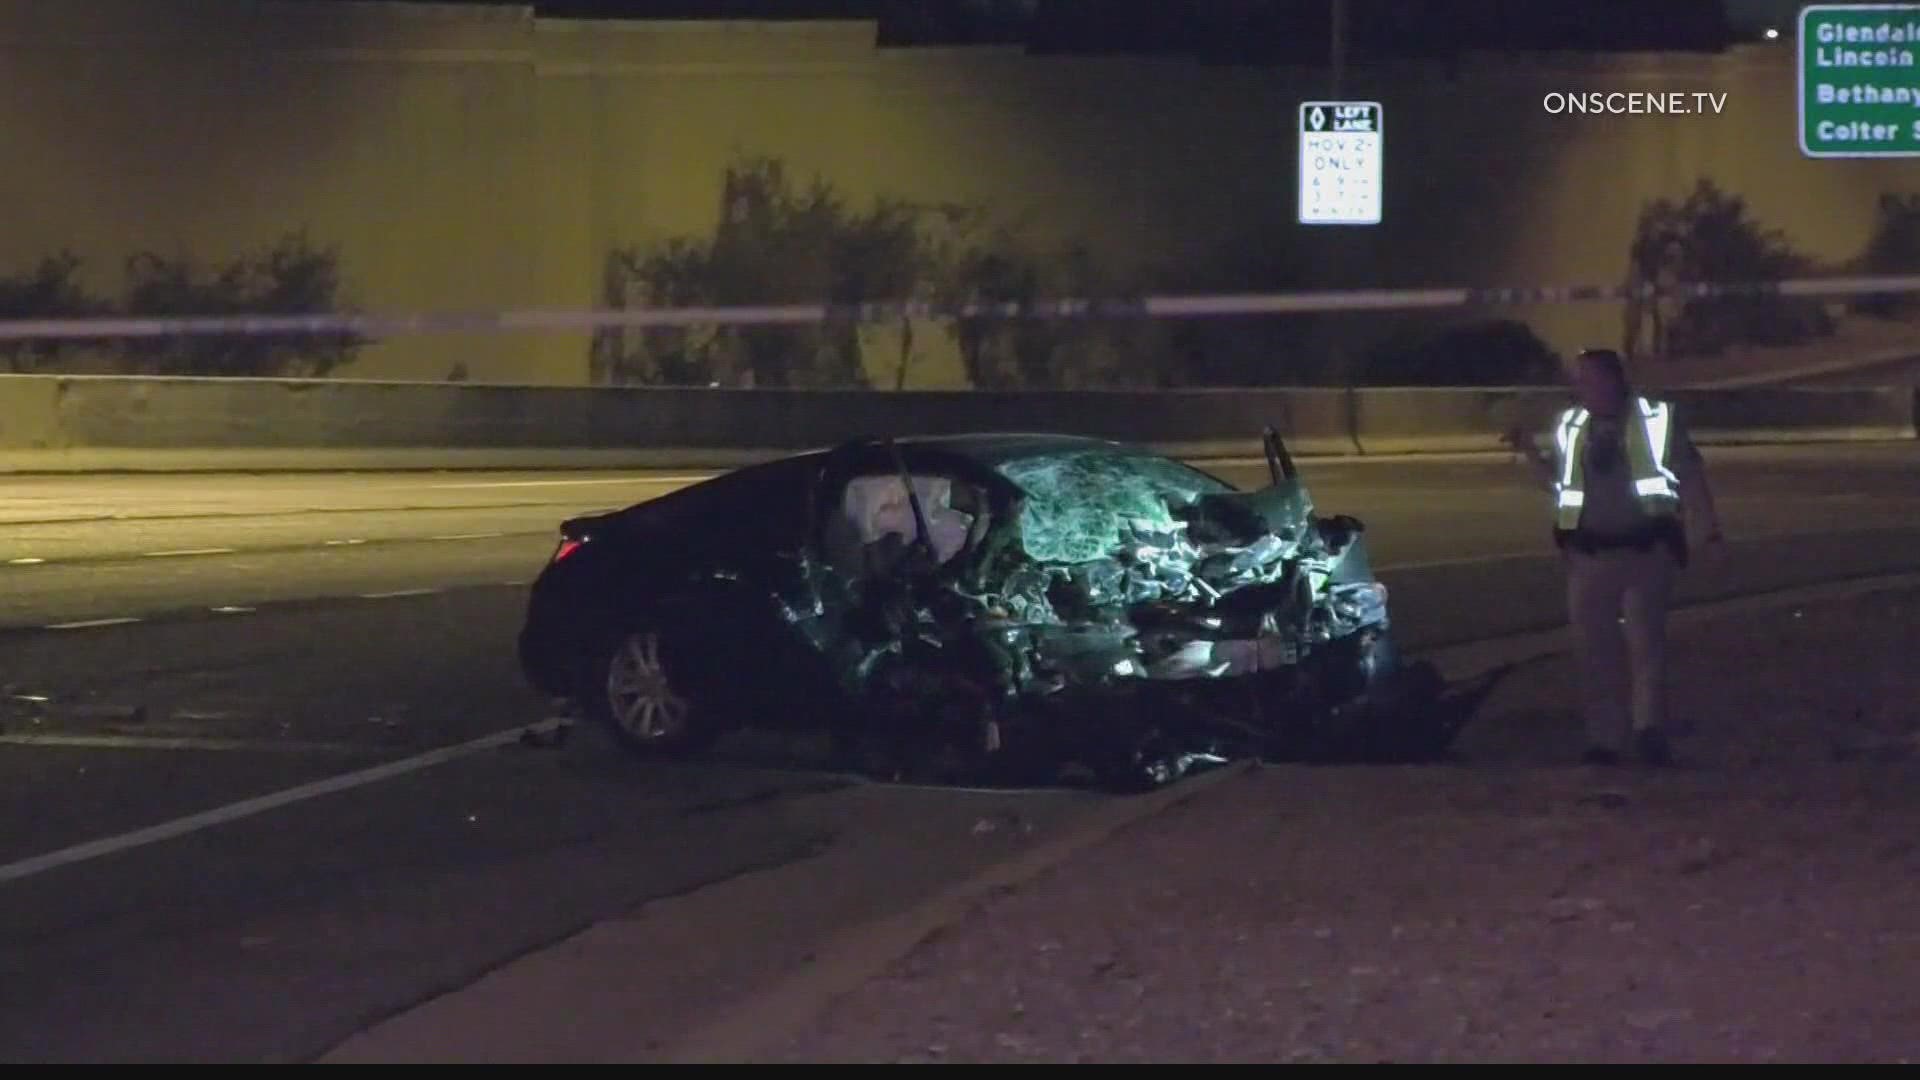 Three wrong-way crashes took place in 24 hours over the weekend in Phoenix. Phoenix has a system that's supposed to prevent these crashes, but isn't everywhere, yet.